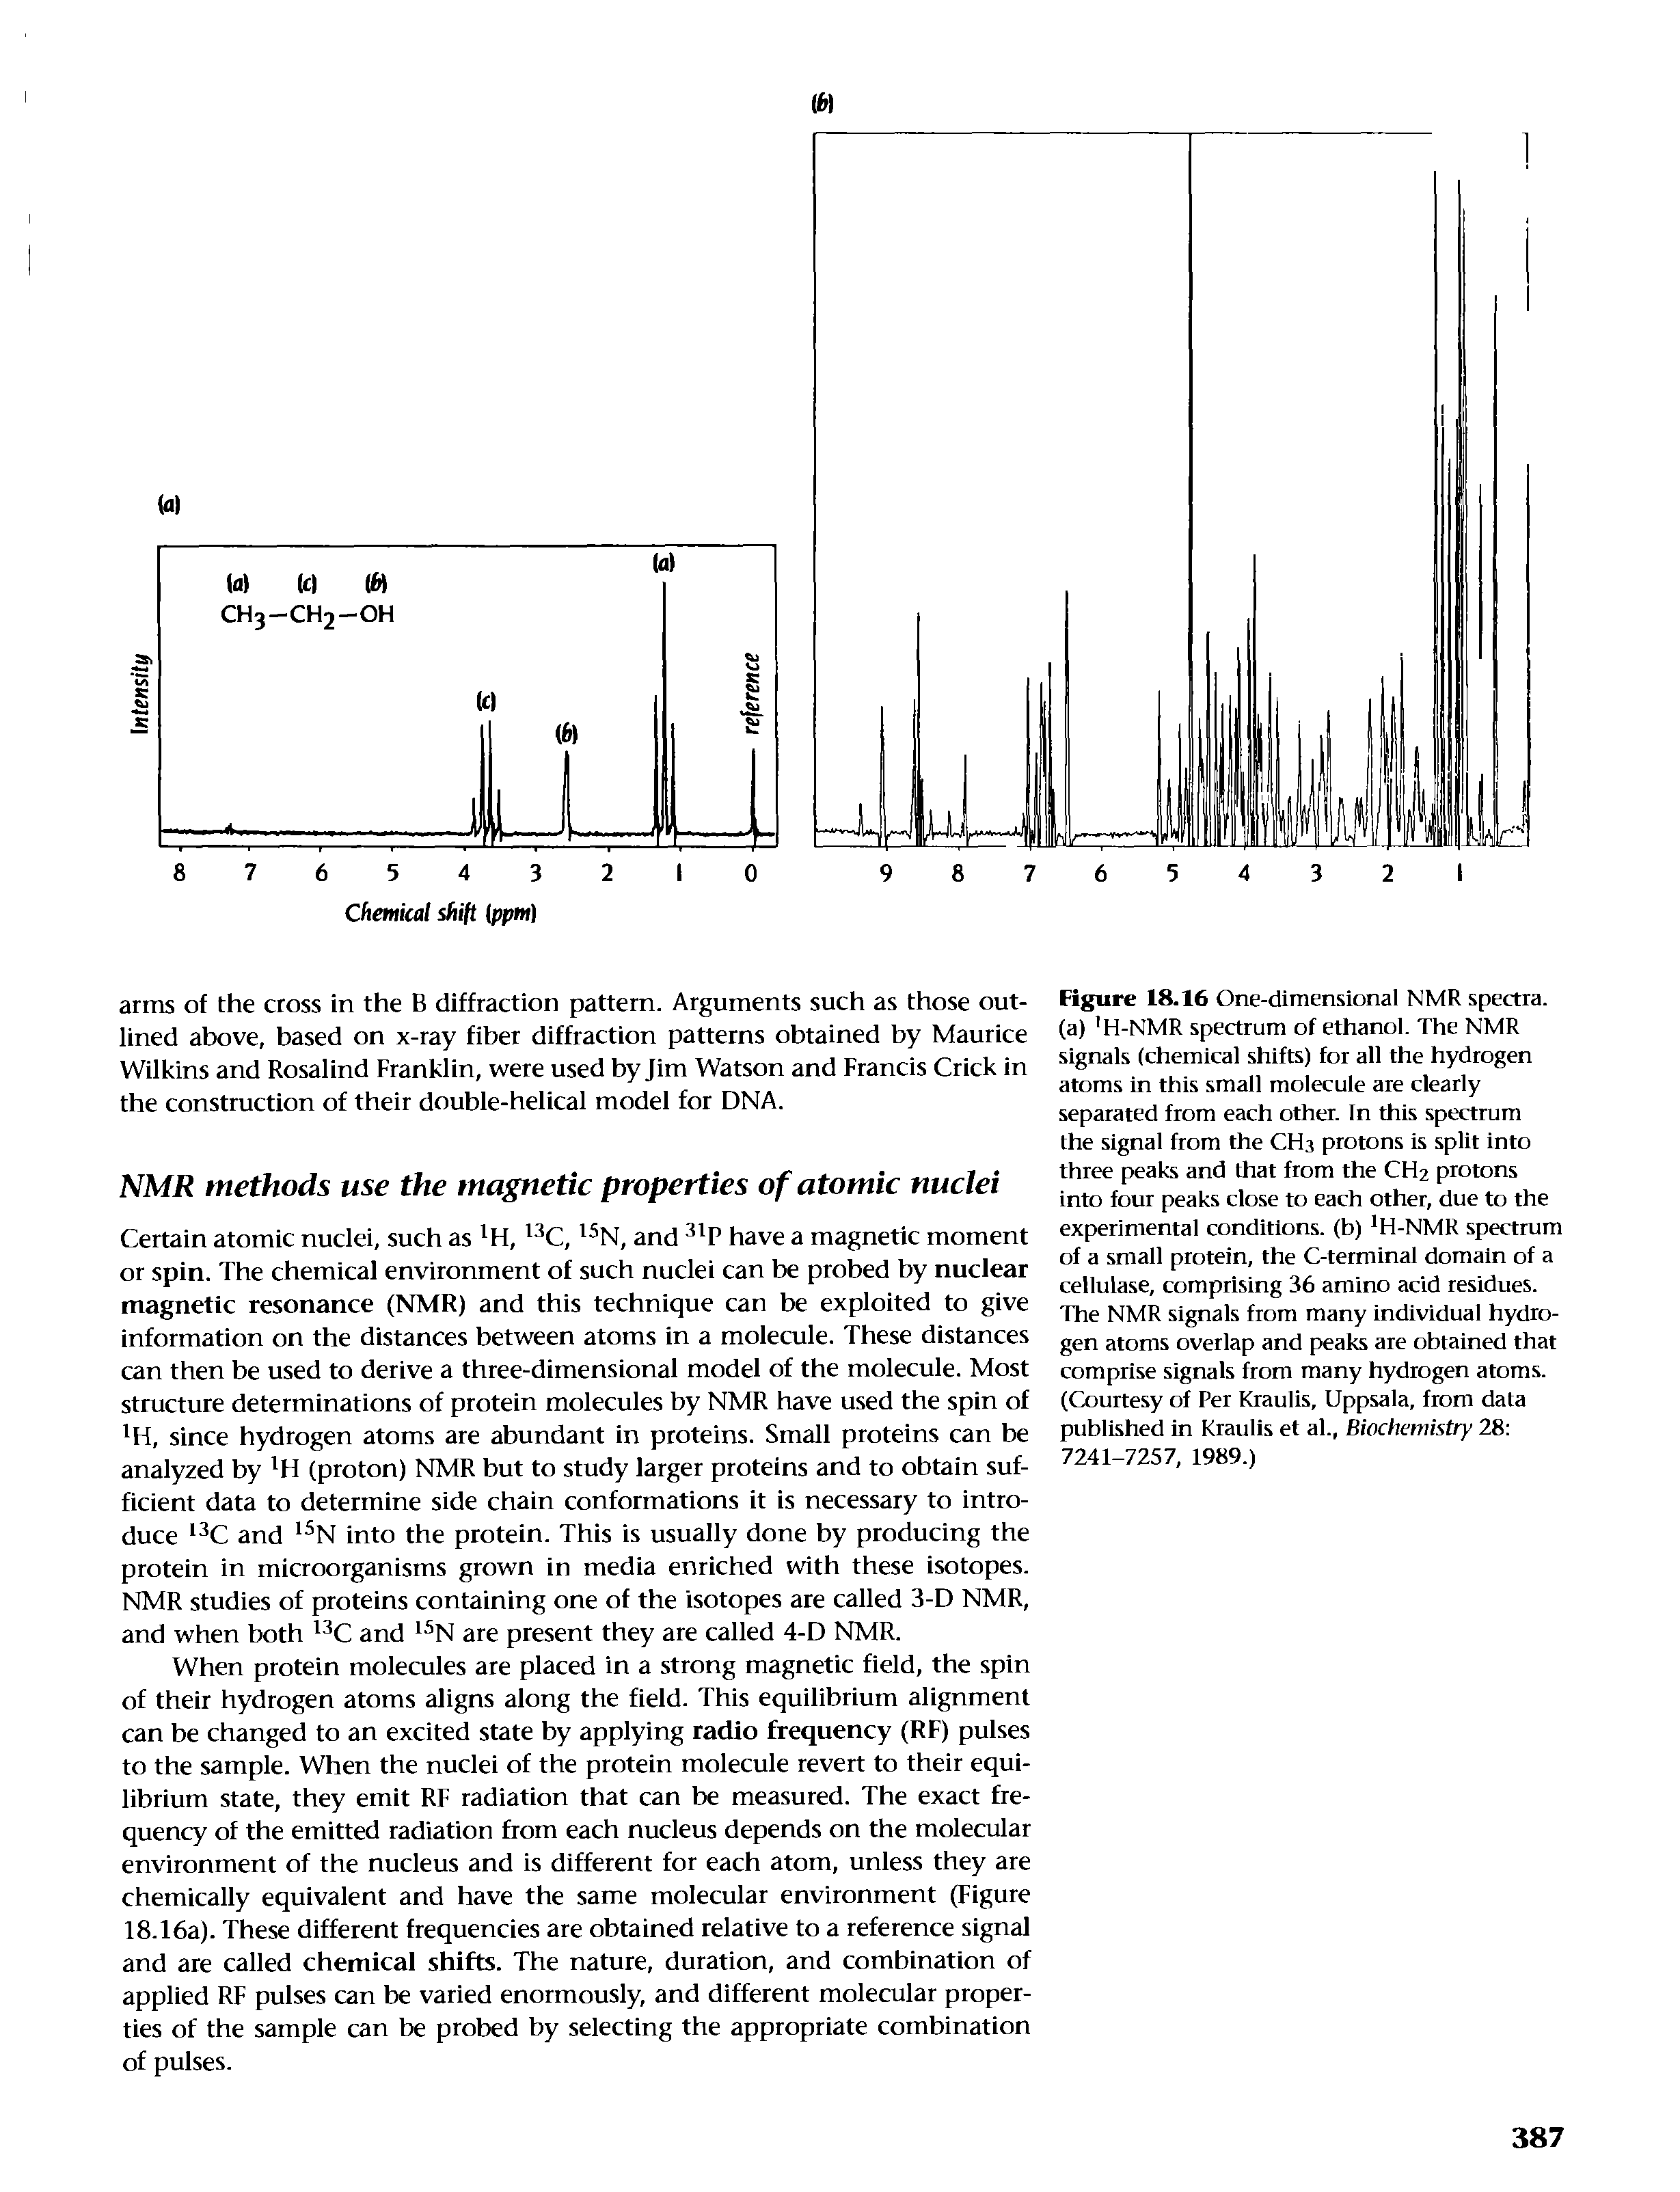 Figure 18.16 One-dlmenslonal NMR spectra, (a) H-NMR spectrum of ethanol. The NMR signals (chemical shifts) for all the hydrogen atoms In this small molecule are clearly separated from each other. In this spectrum the signal from the CH3 protons Is split Into three peaks and that from the CH2 protons Into four peaks close to each other, due to the experimental conditions, (b) H-NMR spectrum of a small protein, the C-terminal domain of a cellulase, comprising 36 amino acid residues. The NMR signals from many individual hydrogen atoms overlap and peaks are obtained that comprise signals from many hydrogen atoms. (Courtesy of Per Kraulis, Uppsala, from data published in Kraulis et al.. Biochemistry 28 7241-7257, 1989.)...